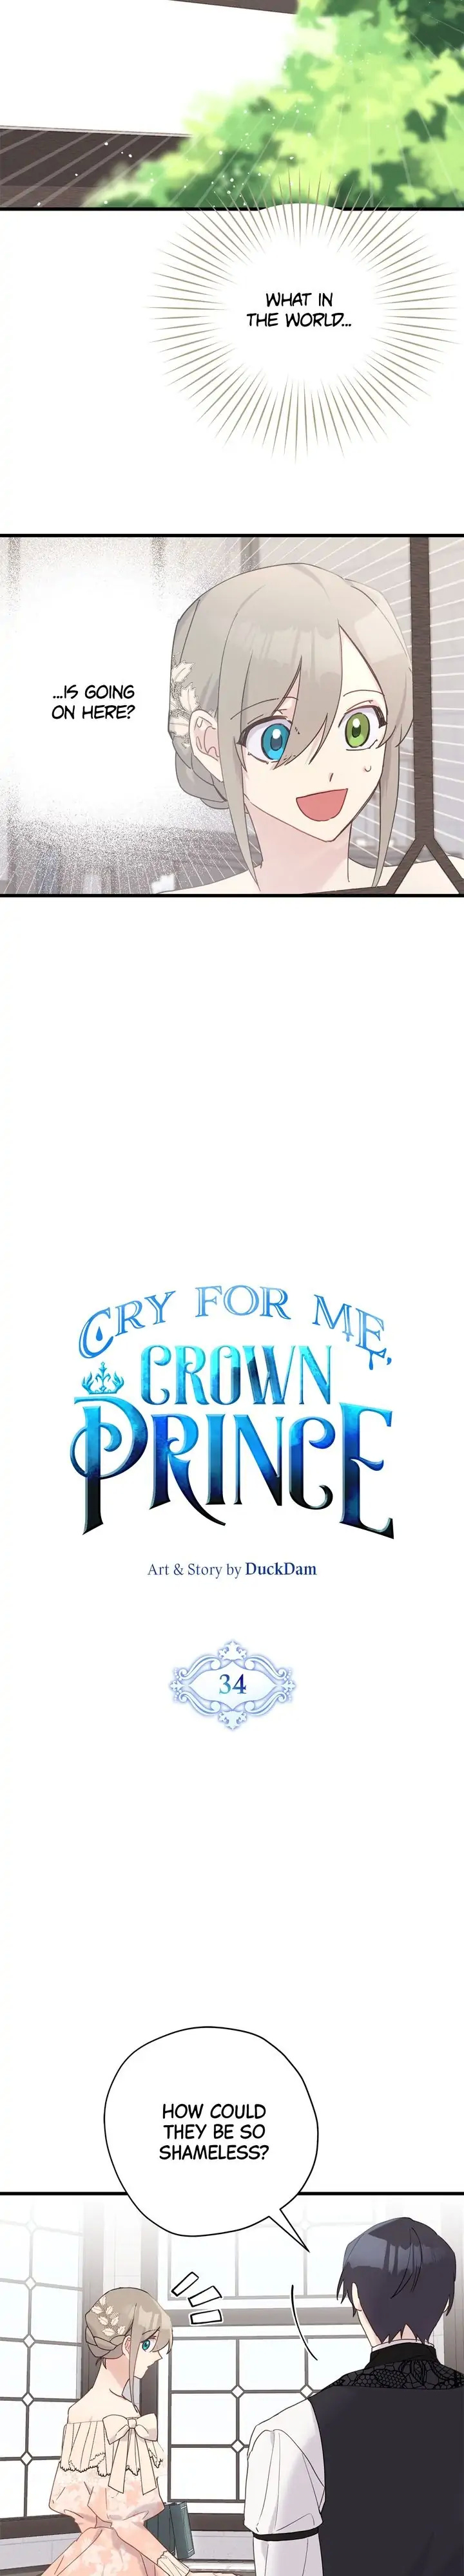 Please Cry, Crown Prince - Page 2